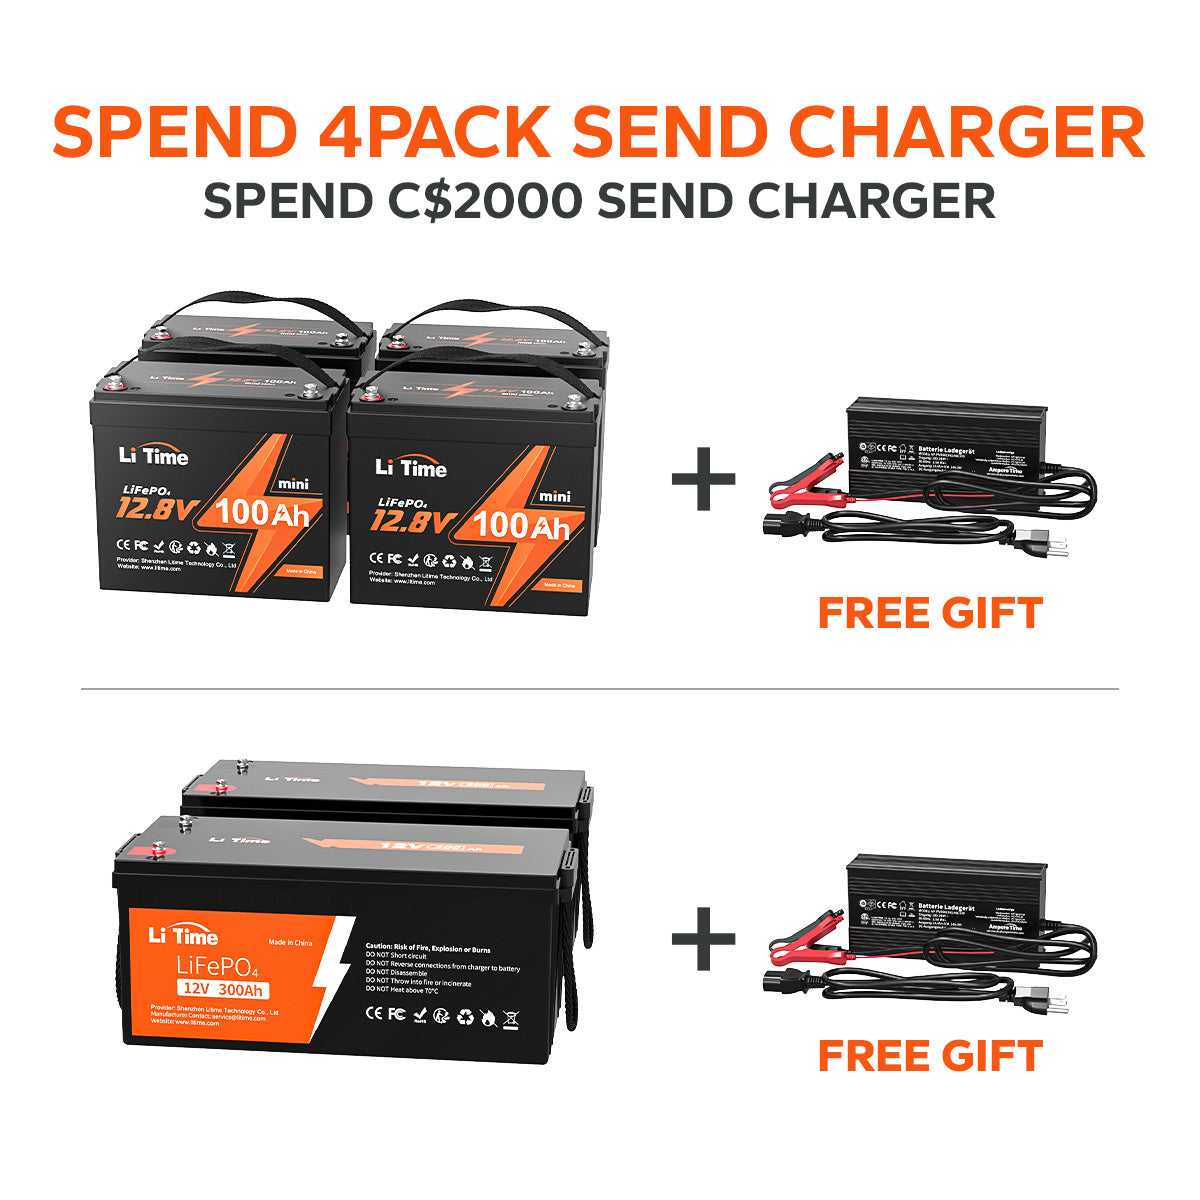 SPEND C$2000 (OR 4PACK) FREE CHARGER